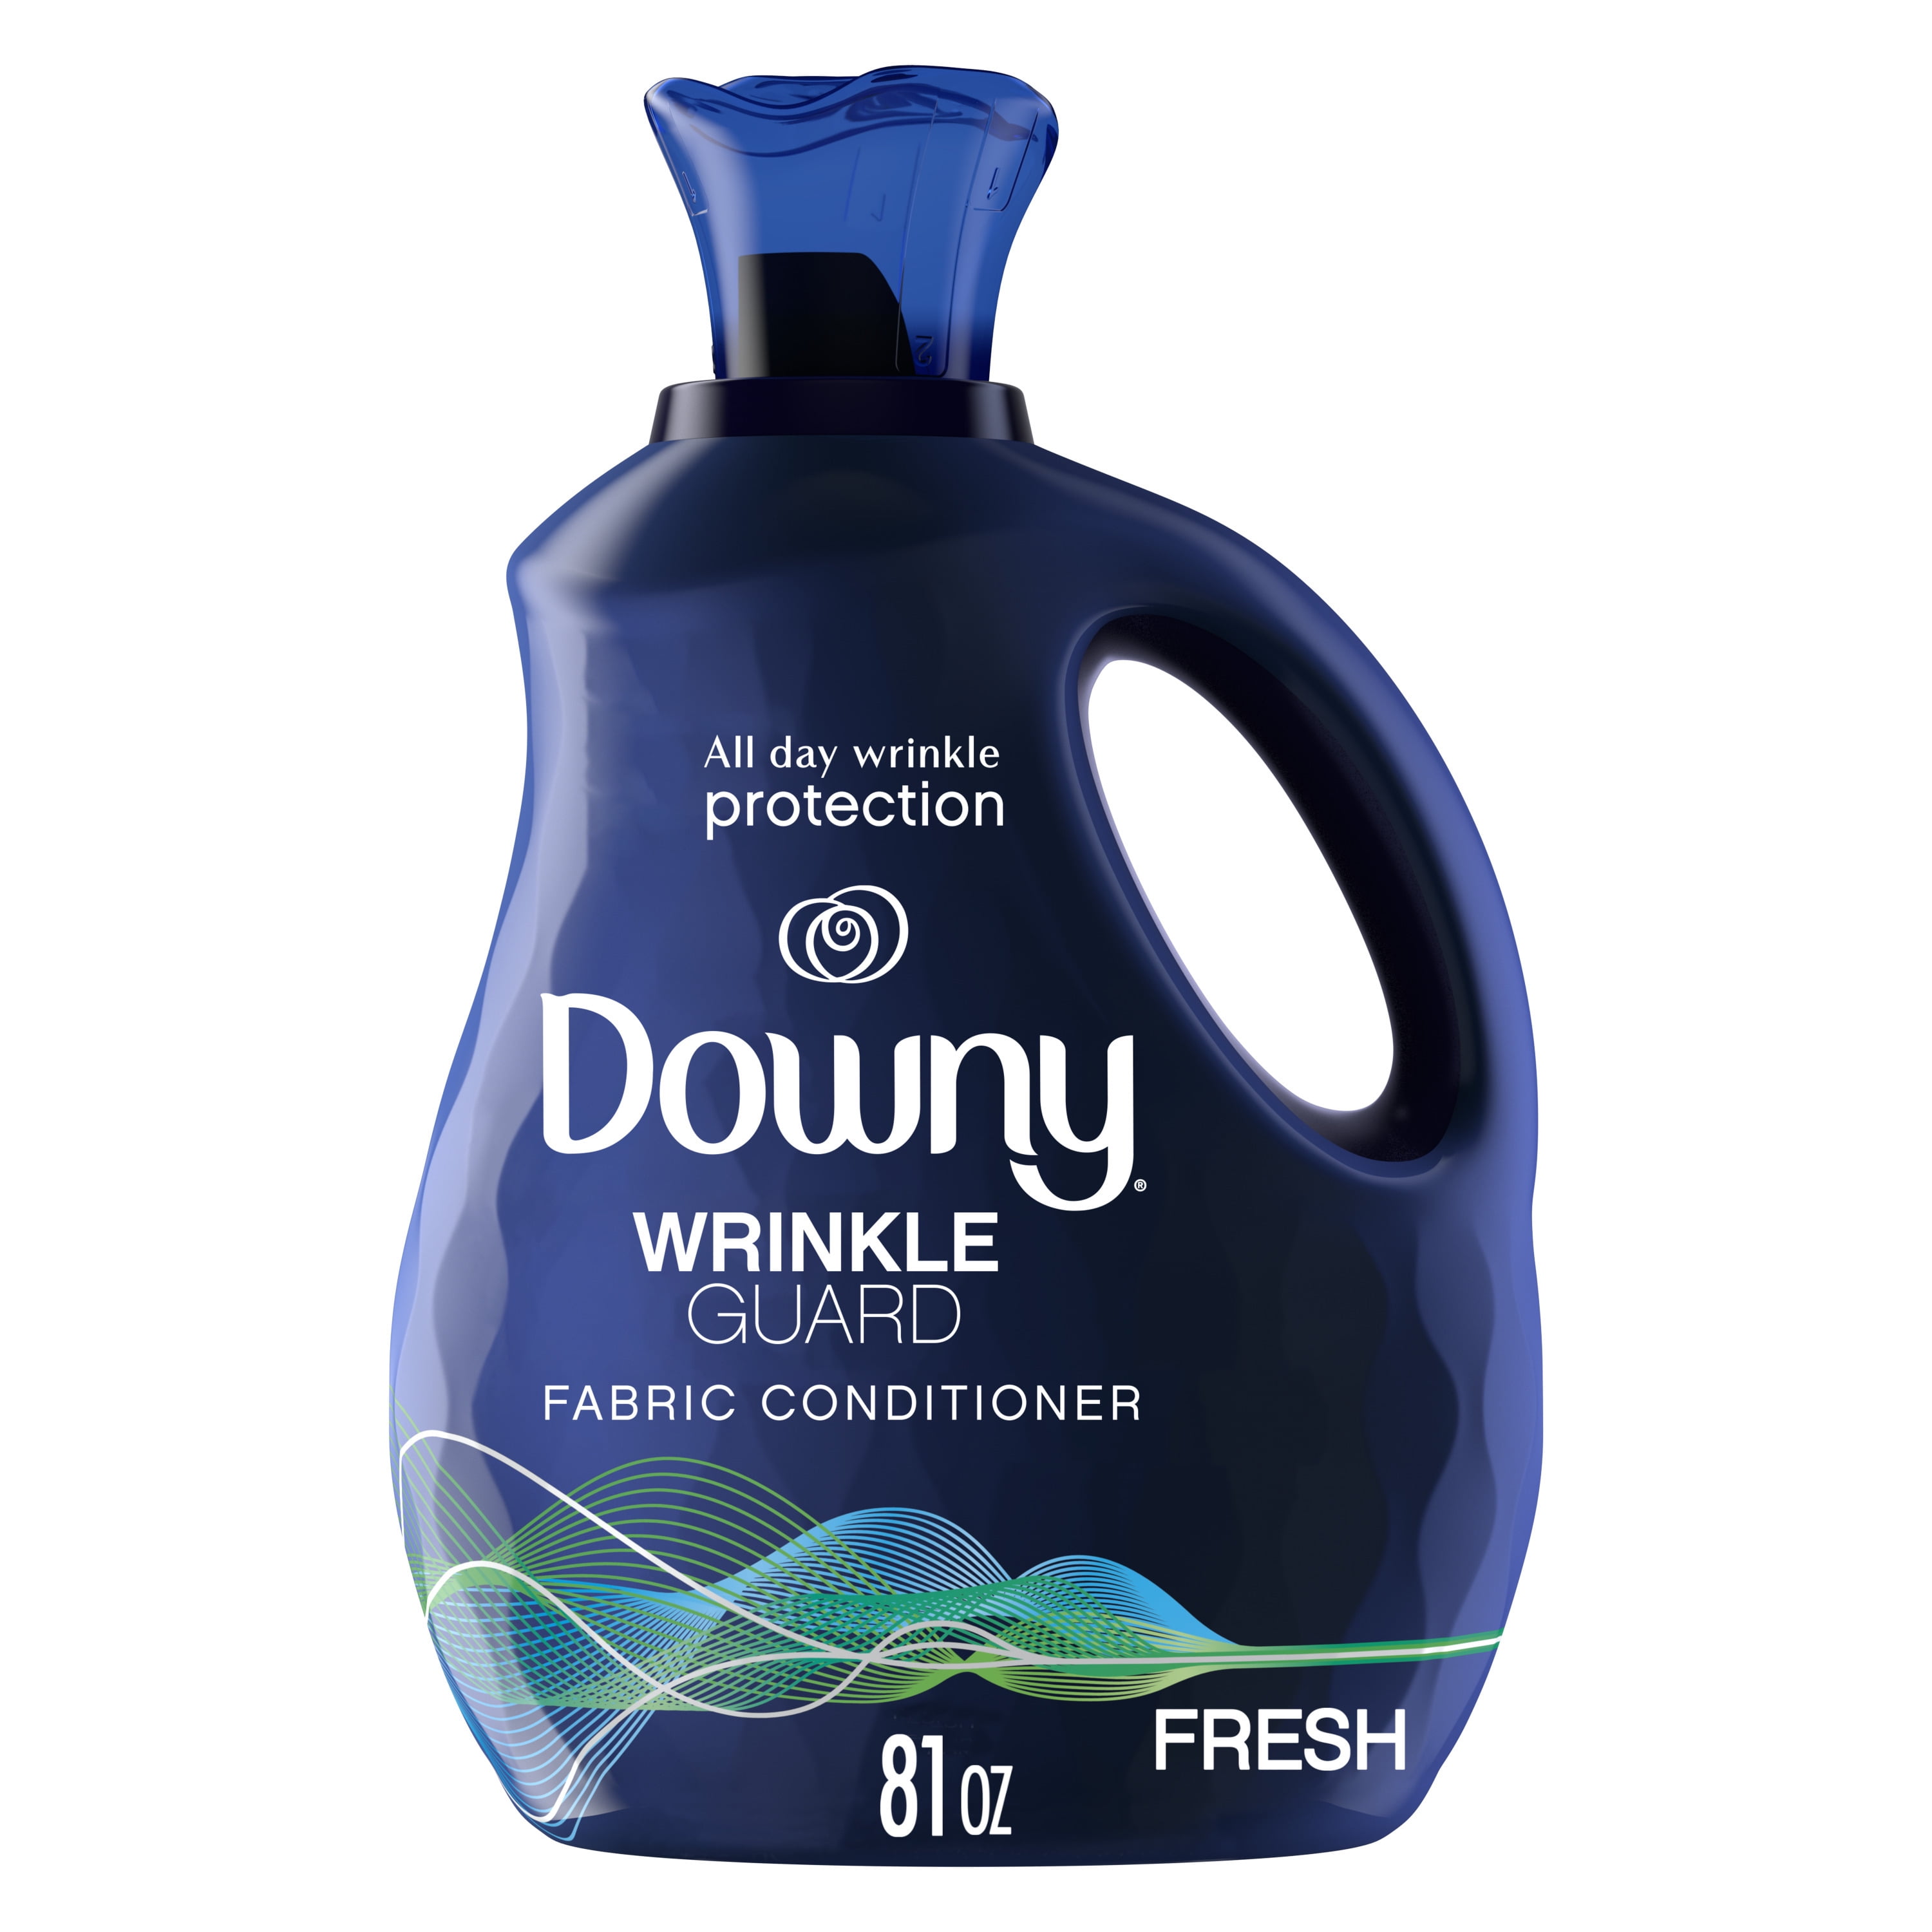 Is Downy Wrinkle Guard A Fabric Softener